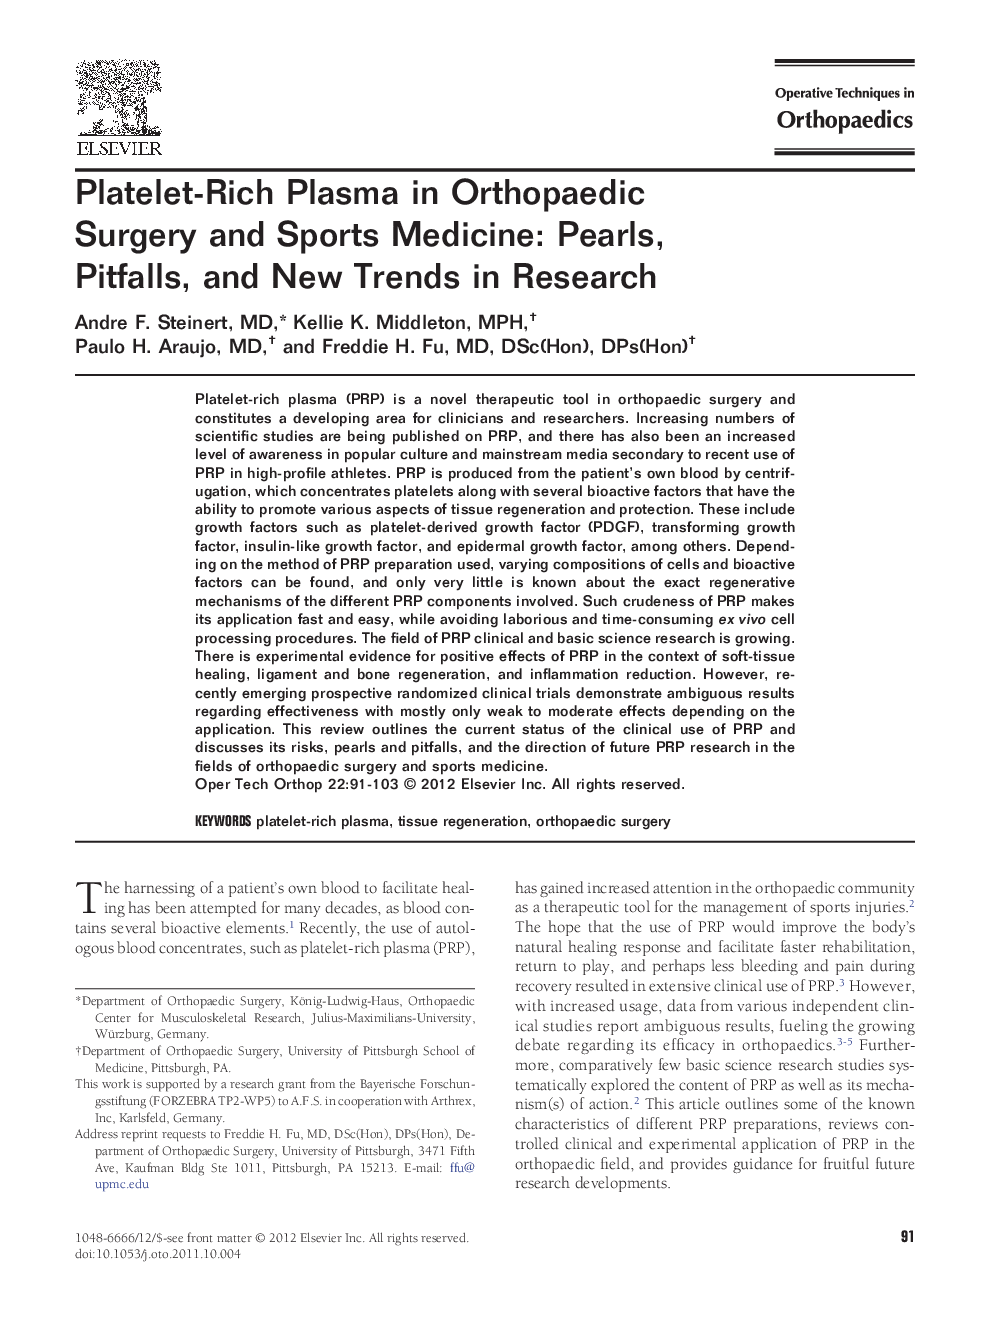 Platelet-Rich Plasma in Orthopaedic Surgery and Sports Medicine: Pearls, Pitfalls, and New Trends in Research 